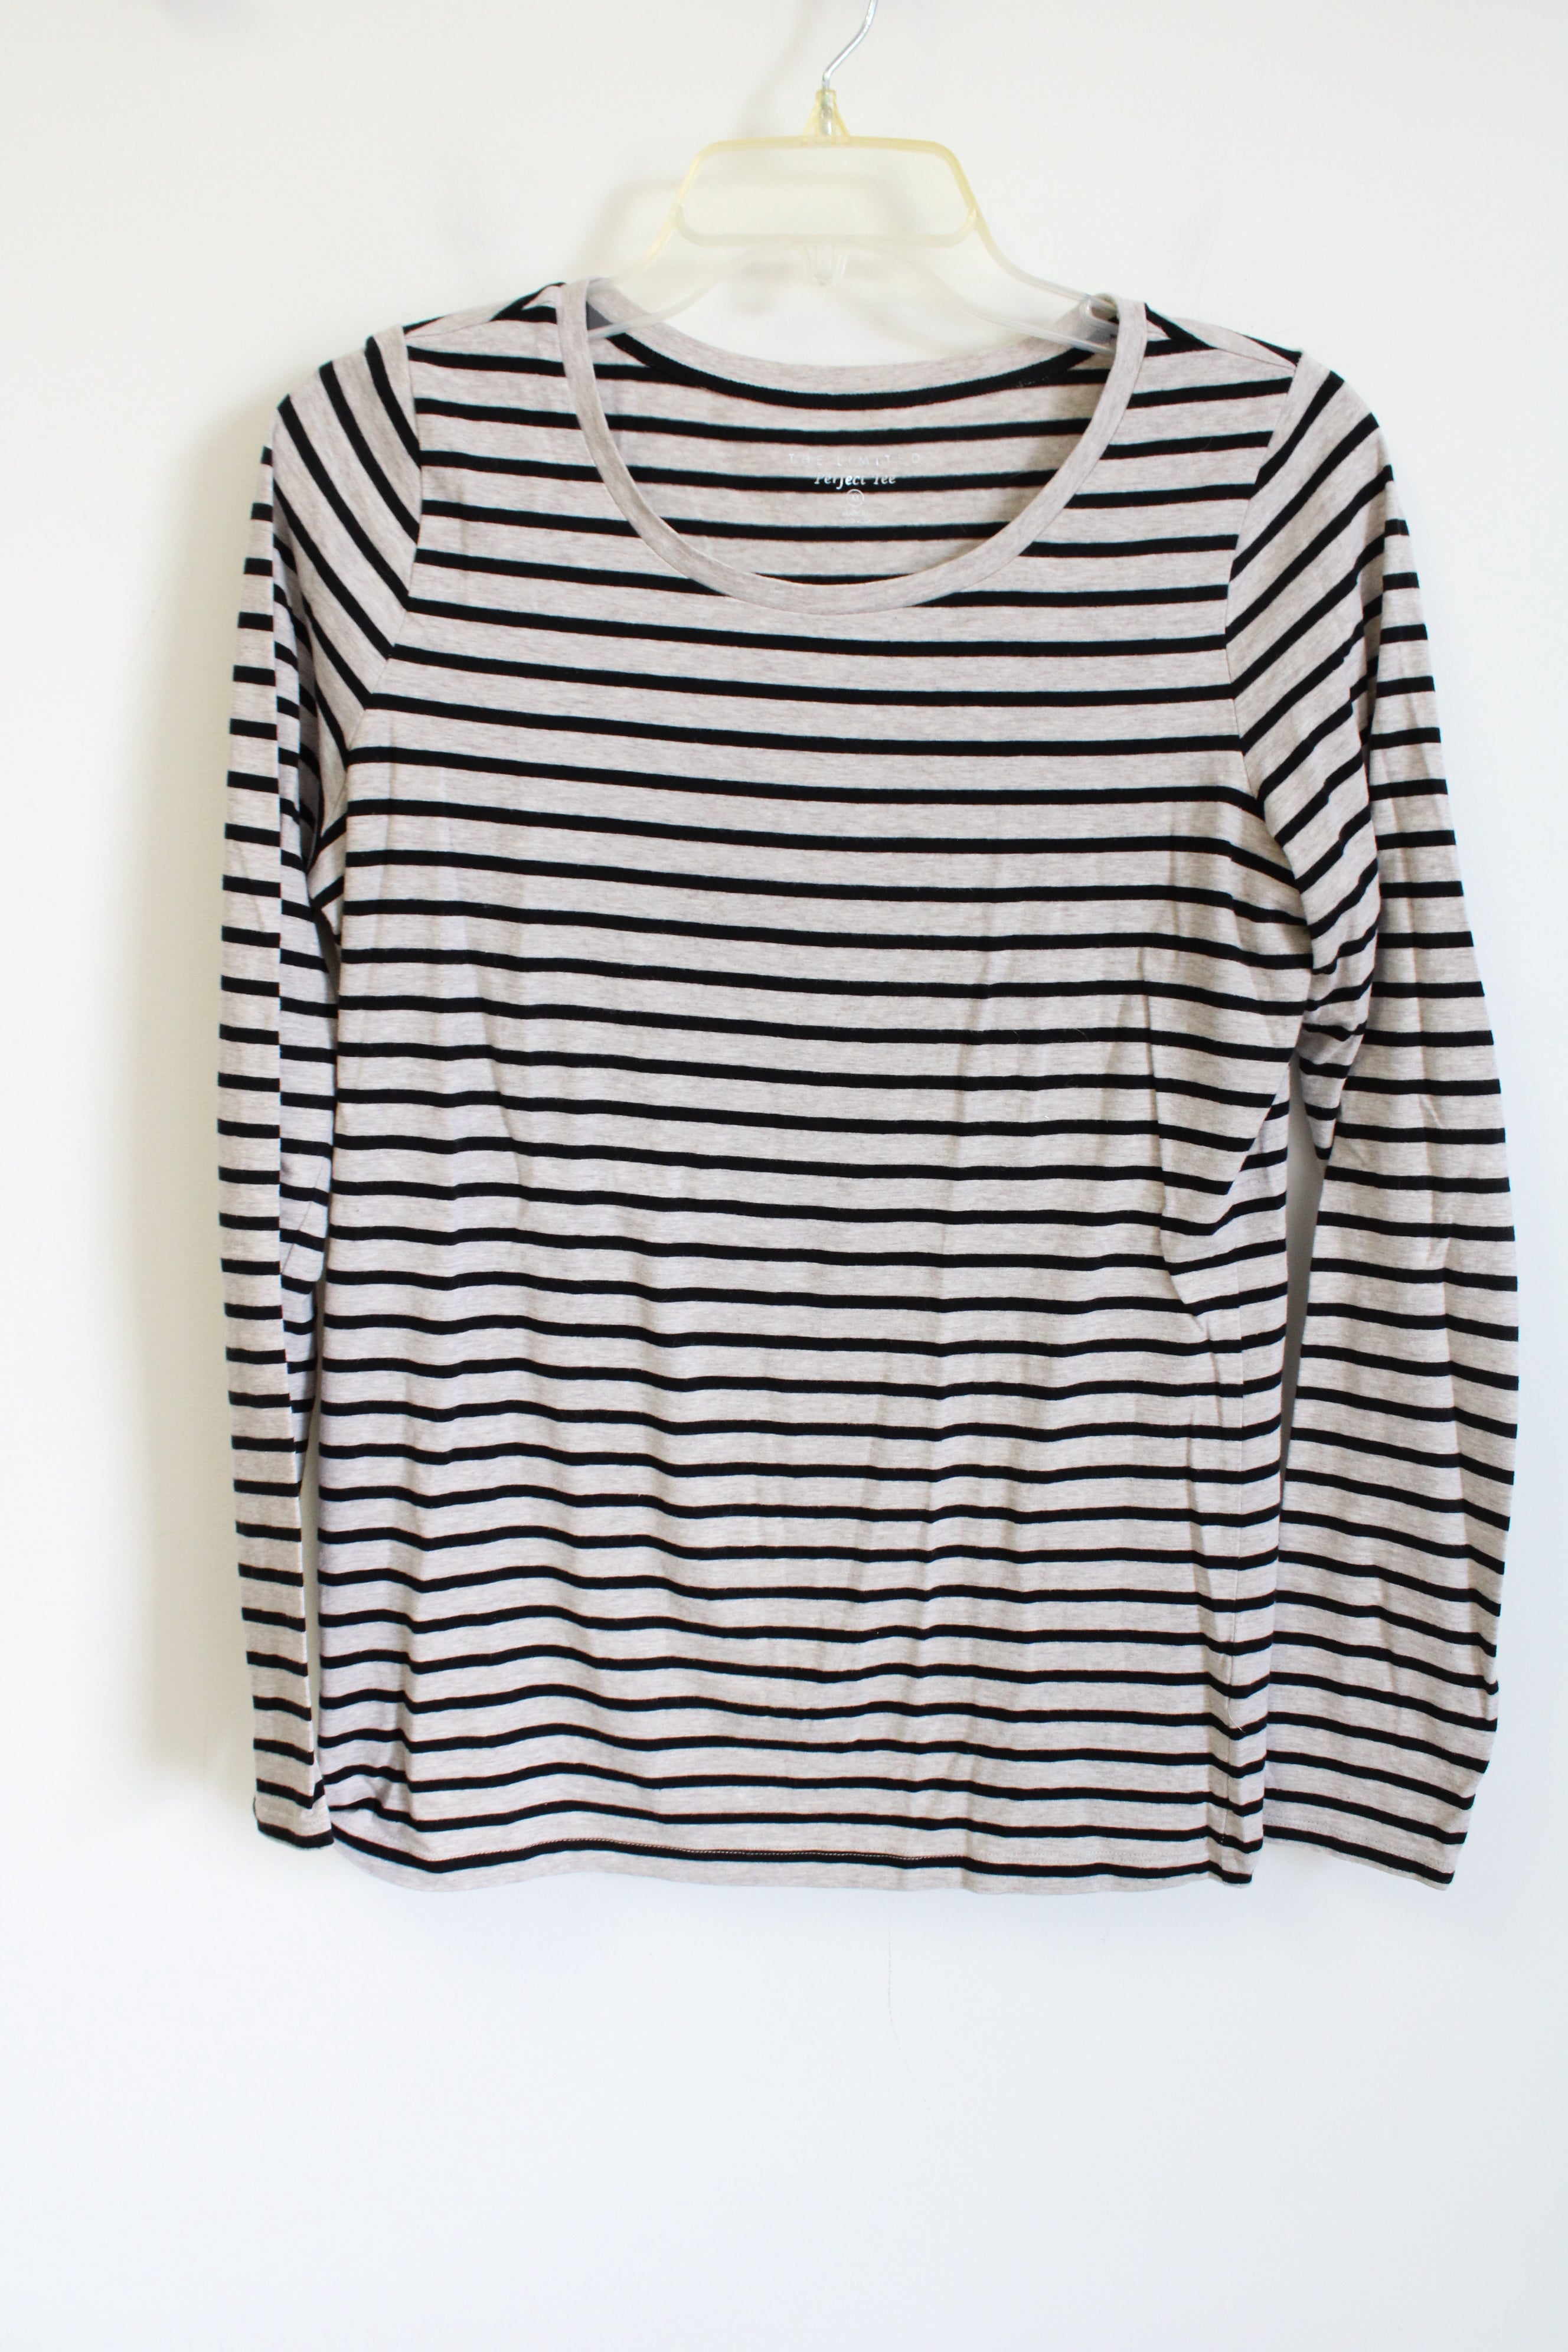 The Limited Perfect Tee Gray & Black Striped Long Sleeved Top | M